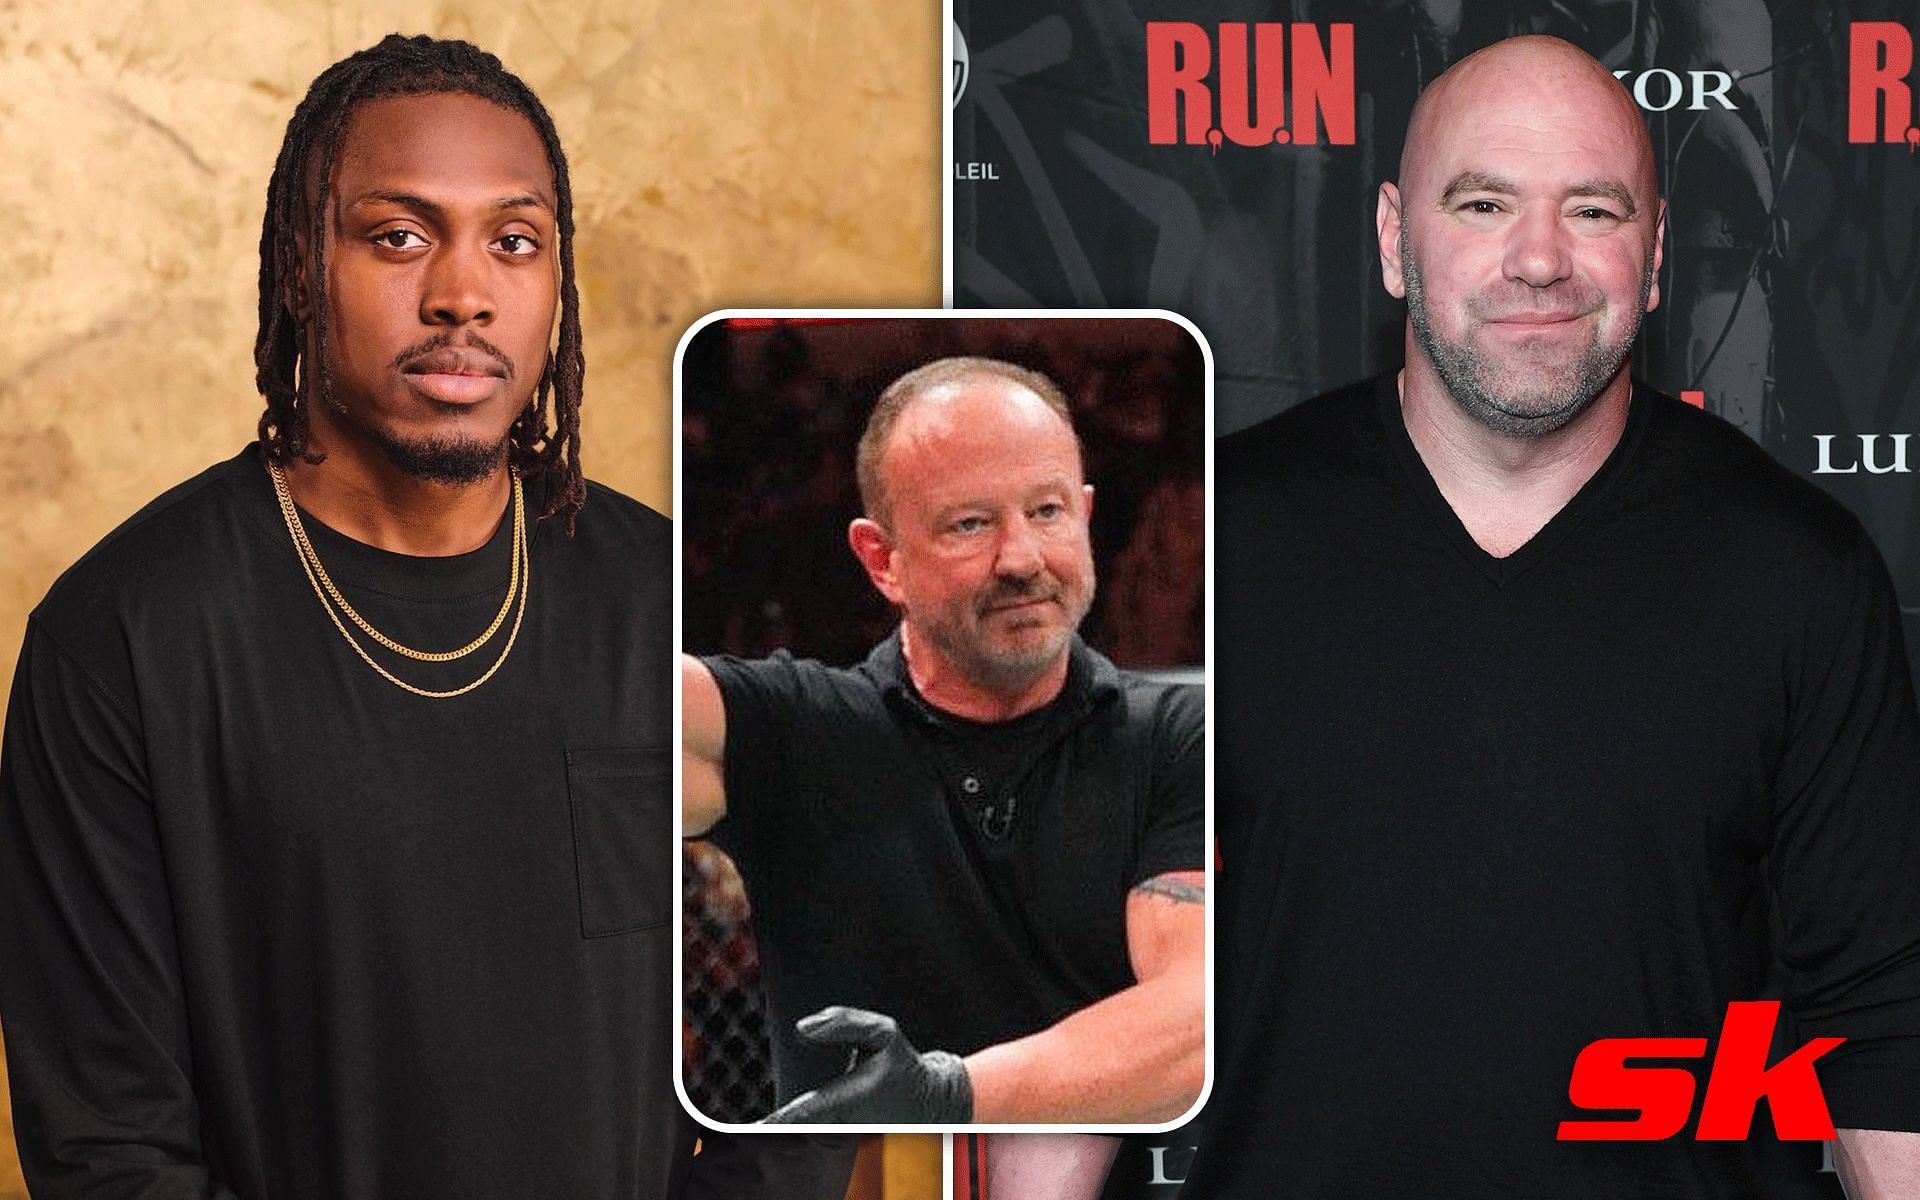 From left to right: Jalin Turner [image courtesy of @thetarantula/Instagram], Kerry Hatley [image courtesy of @kerryhatley/Instagram]; Dana White [image courtesy of Getty Images]